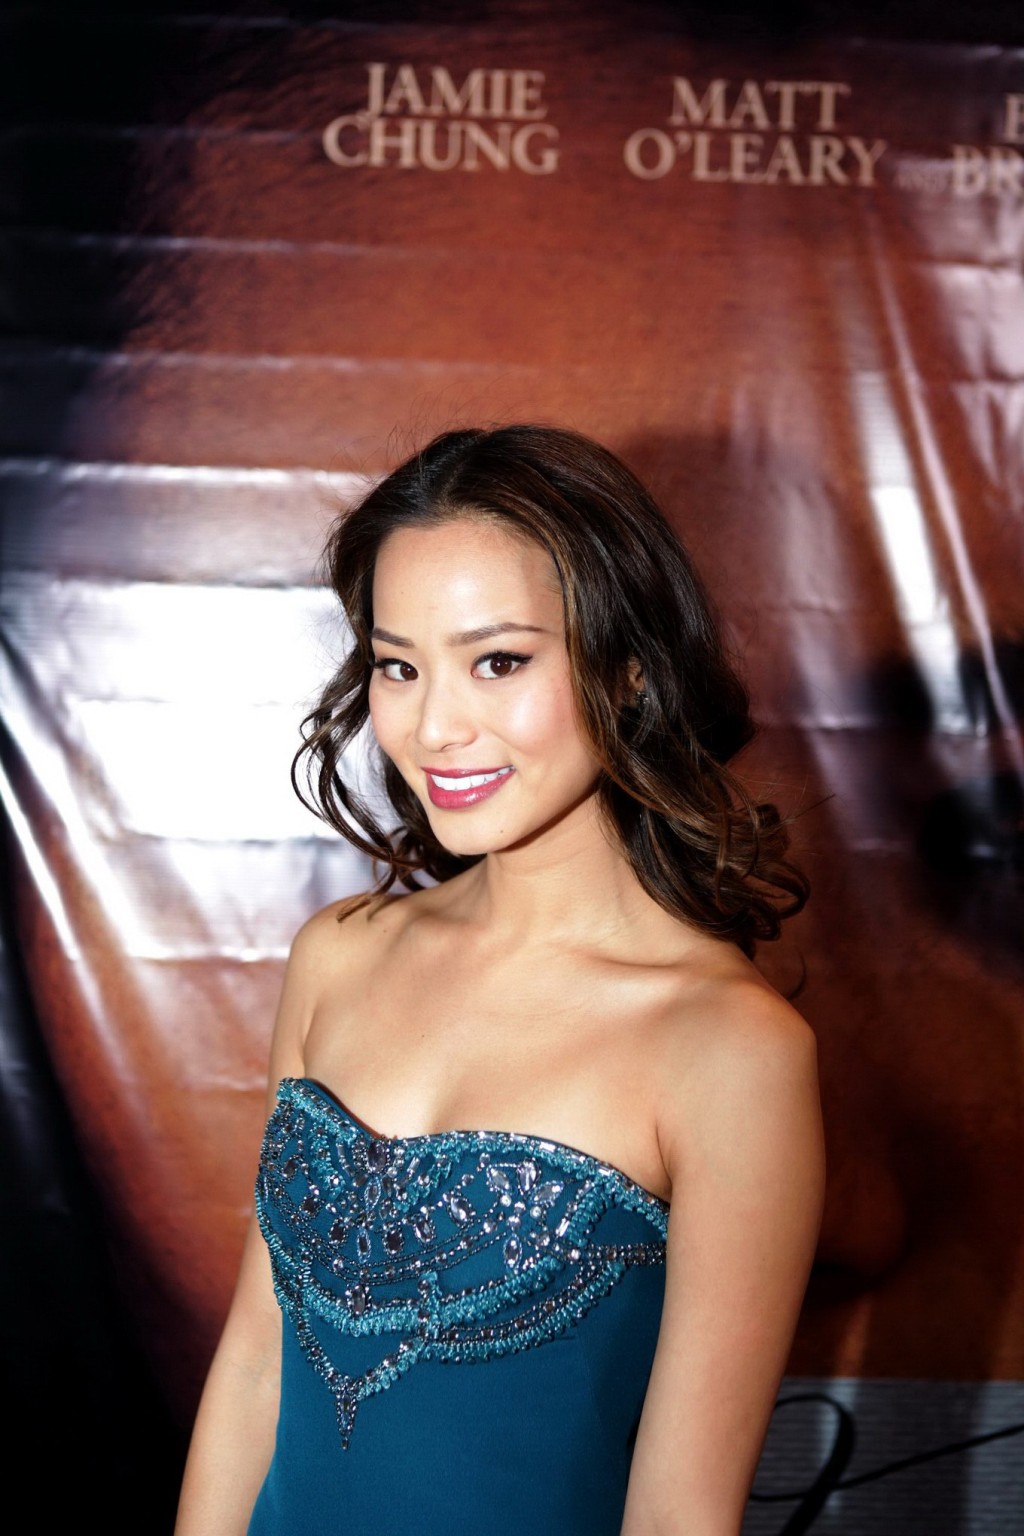 Jamie Chung cleavy wearing a tube dress at the 'Eden' premiere in LA #75236288